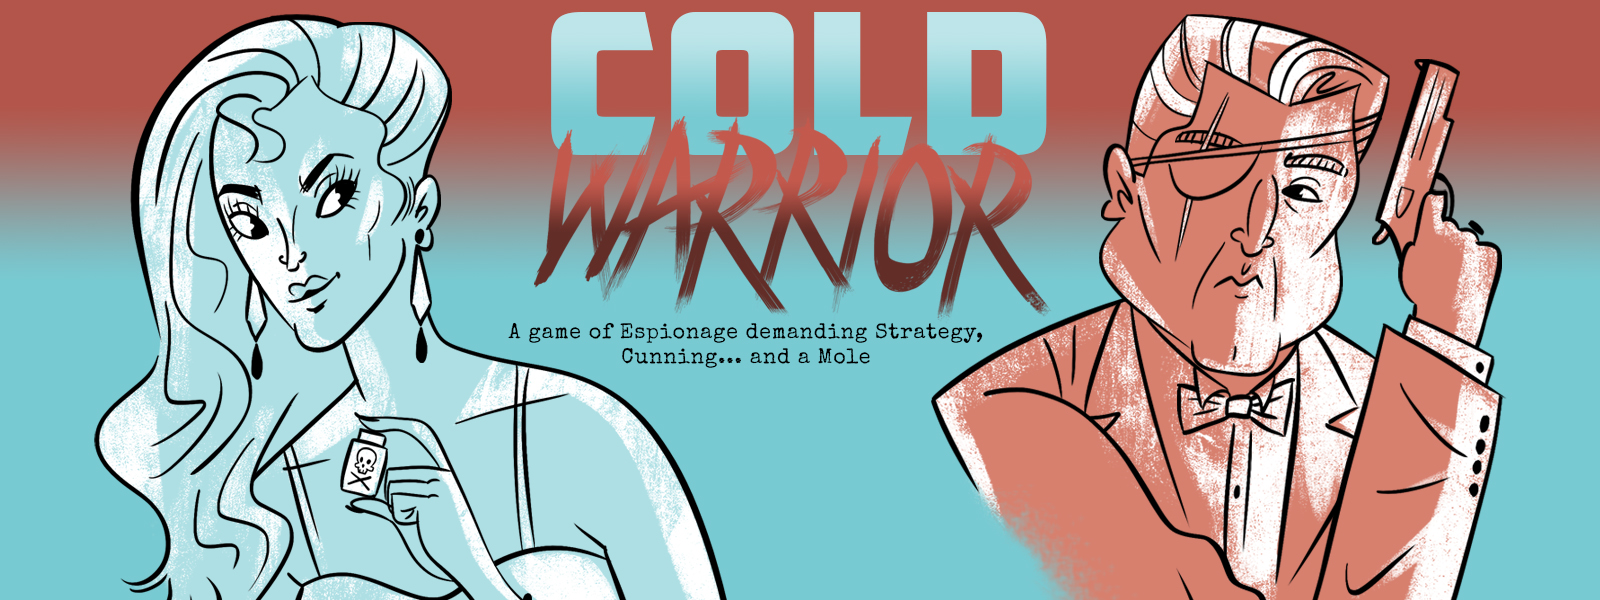 Cold warrior game